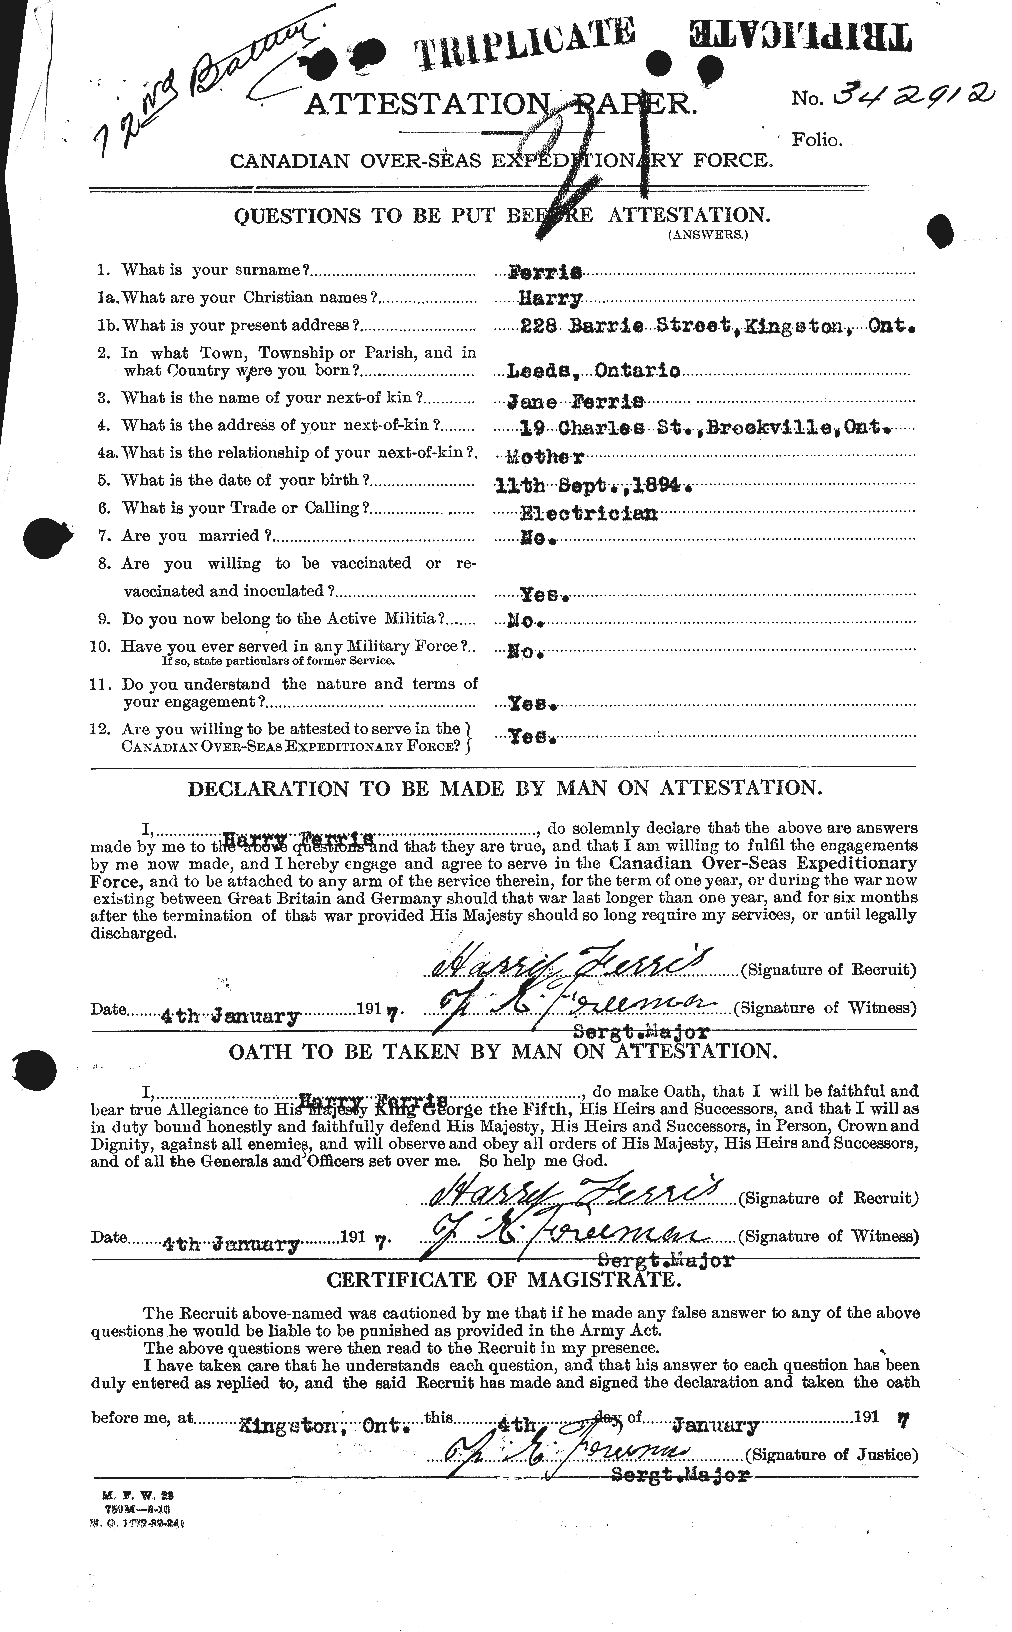 Personnel Records of the First World War - CEF 325194a